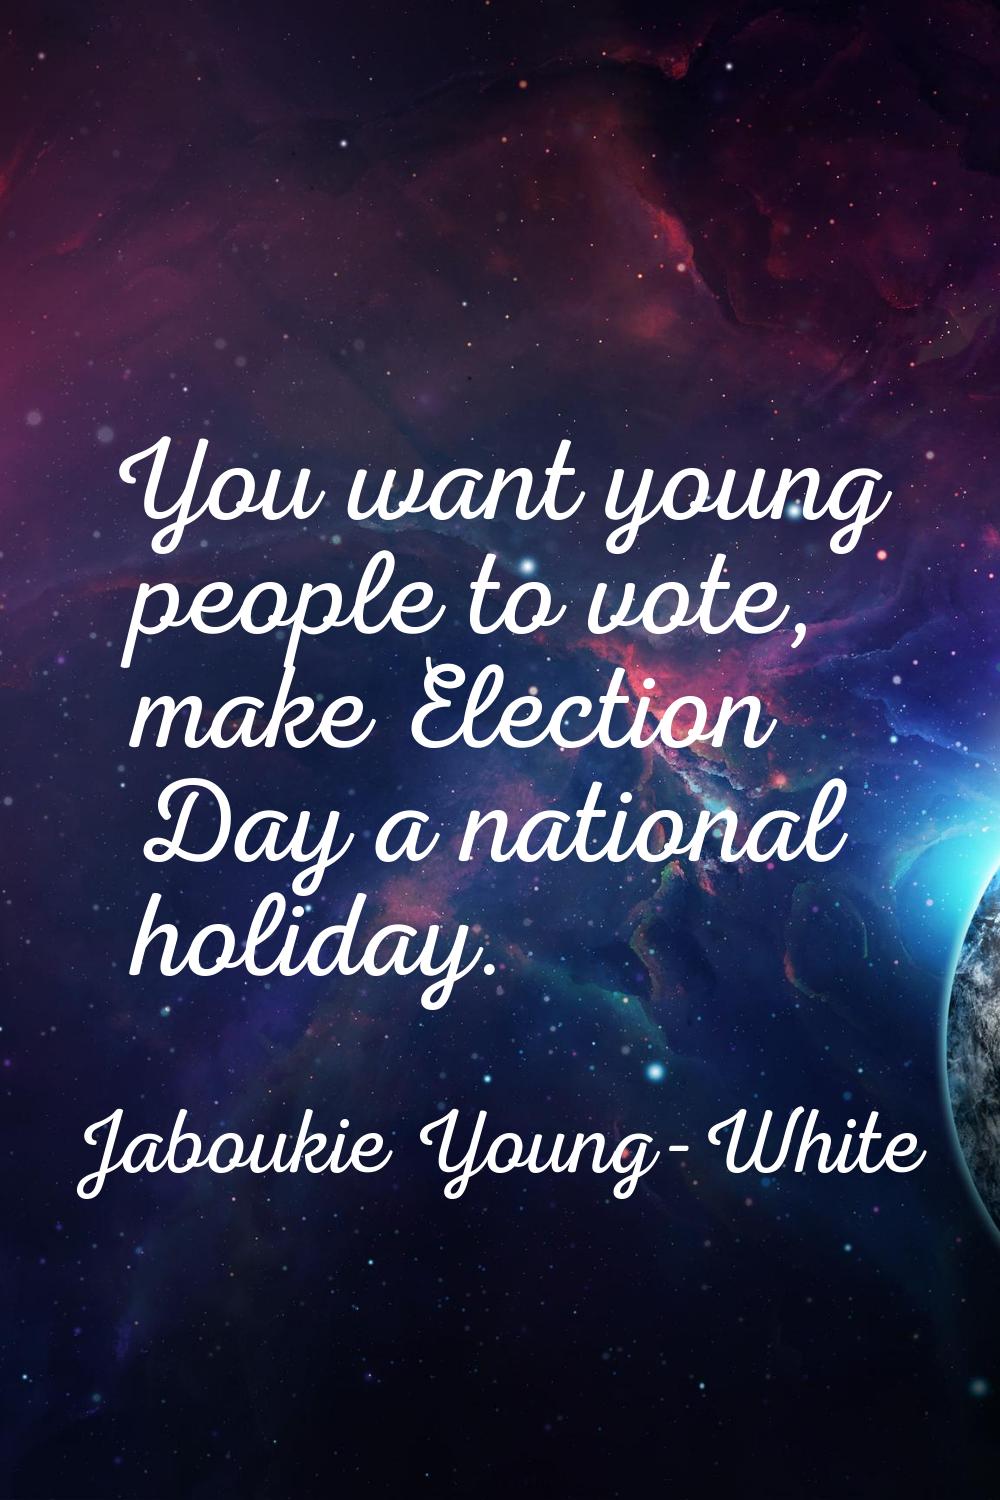 You want young people to vote, make Election Day a national holiday.